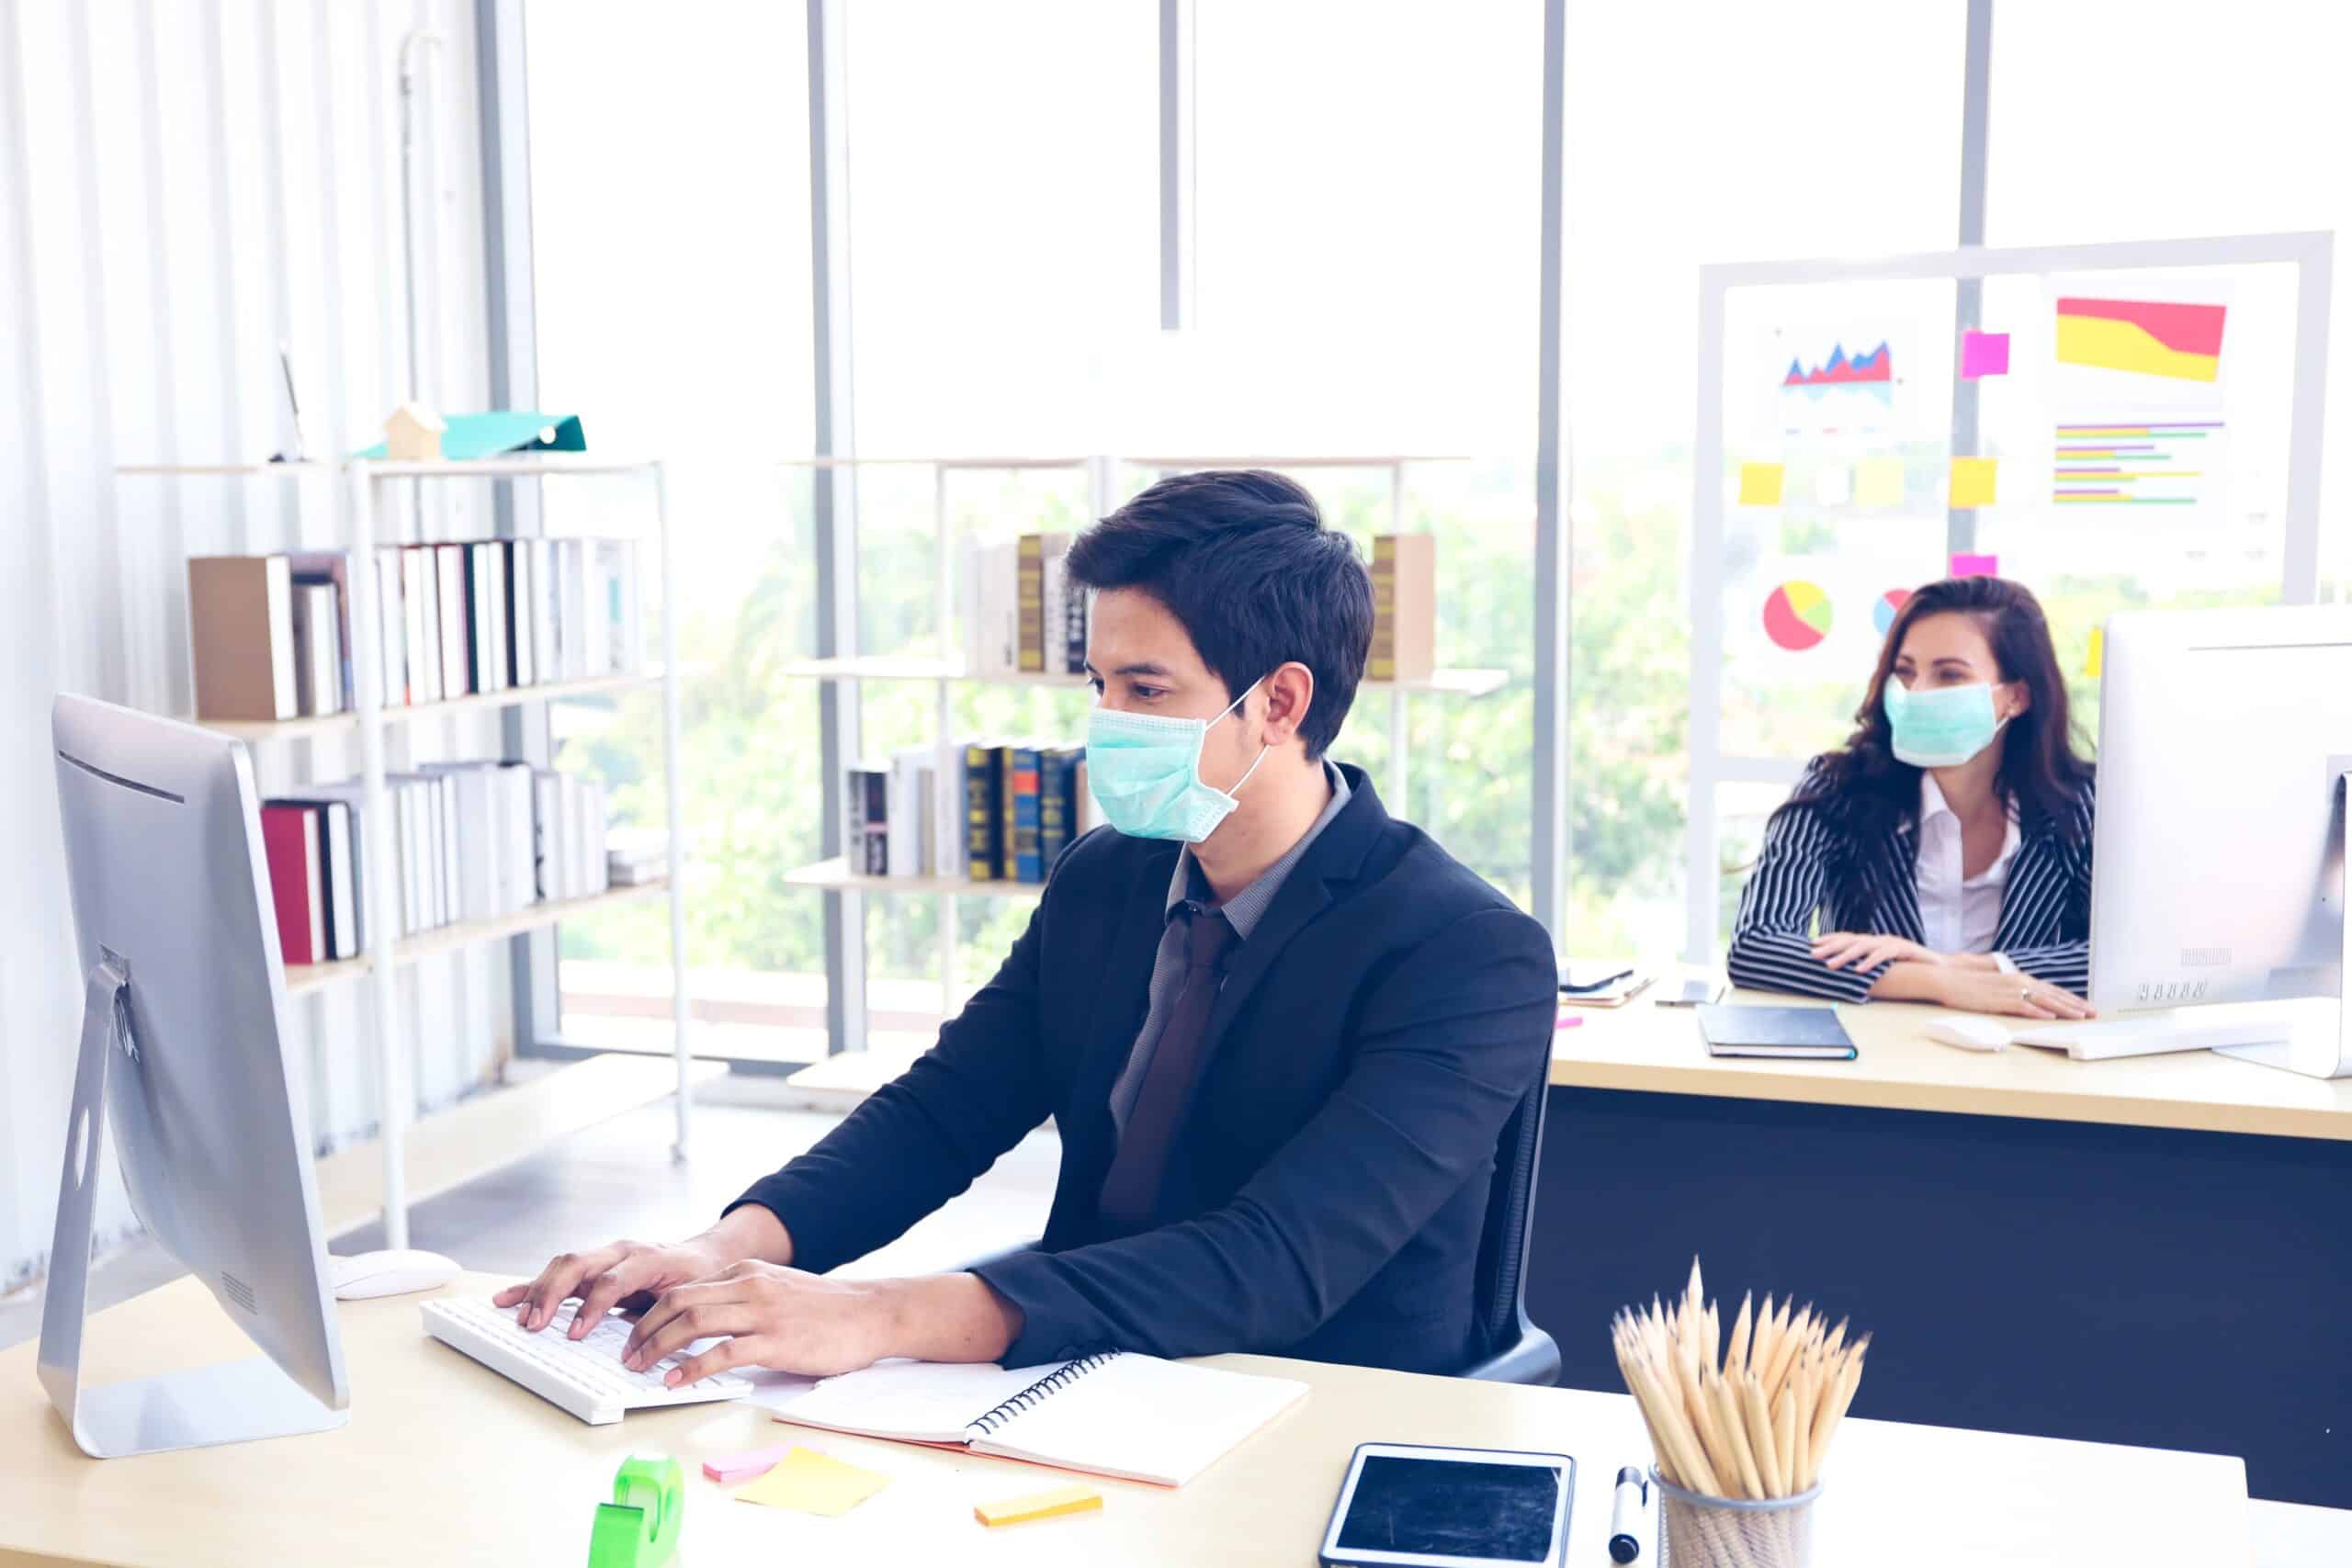 Workers in office wearing face masks.